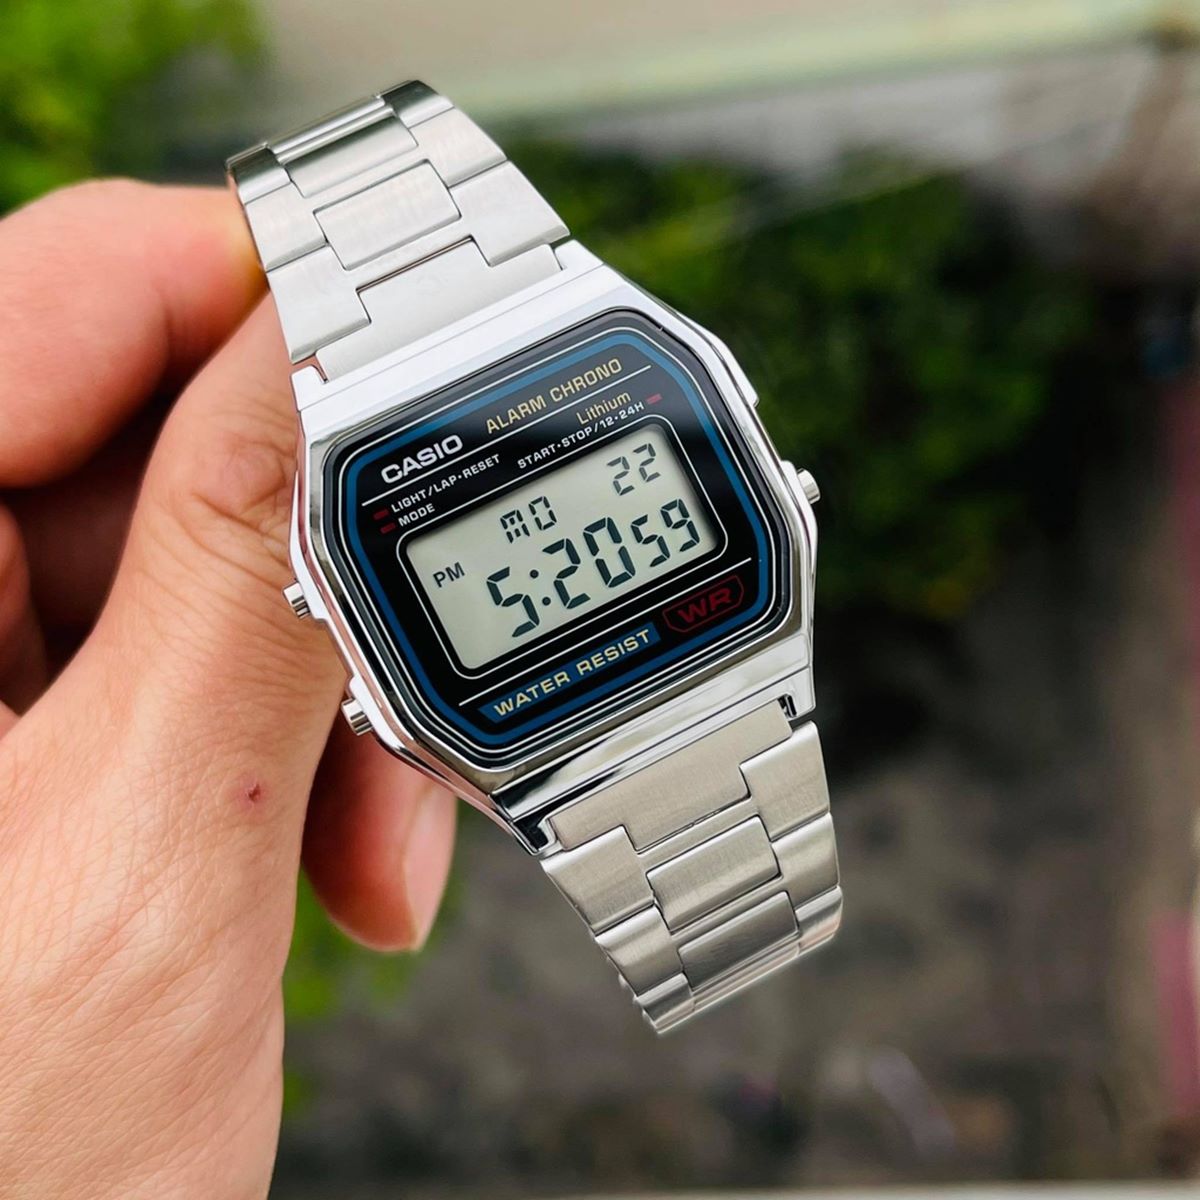 How To Set Time On A Casio Watch